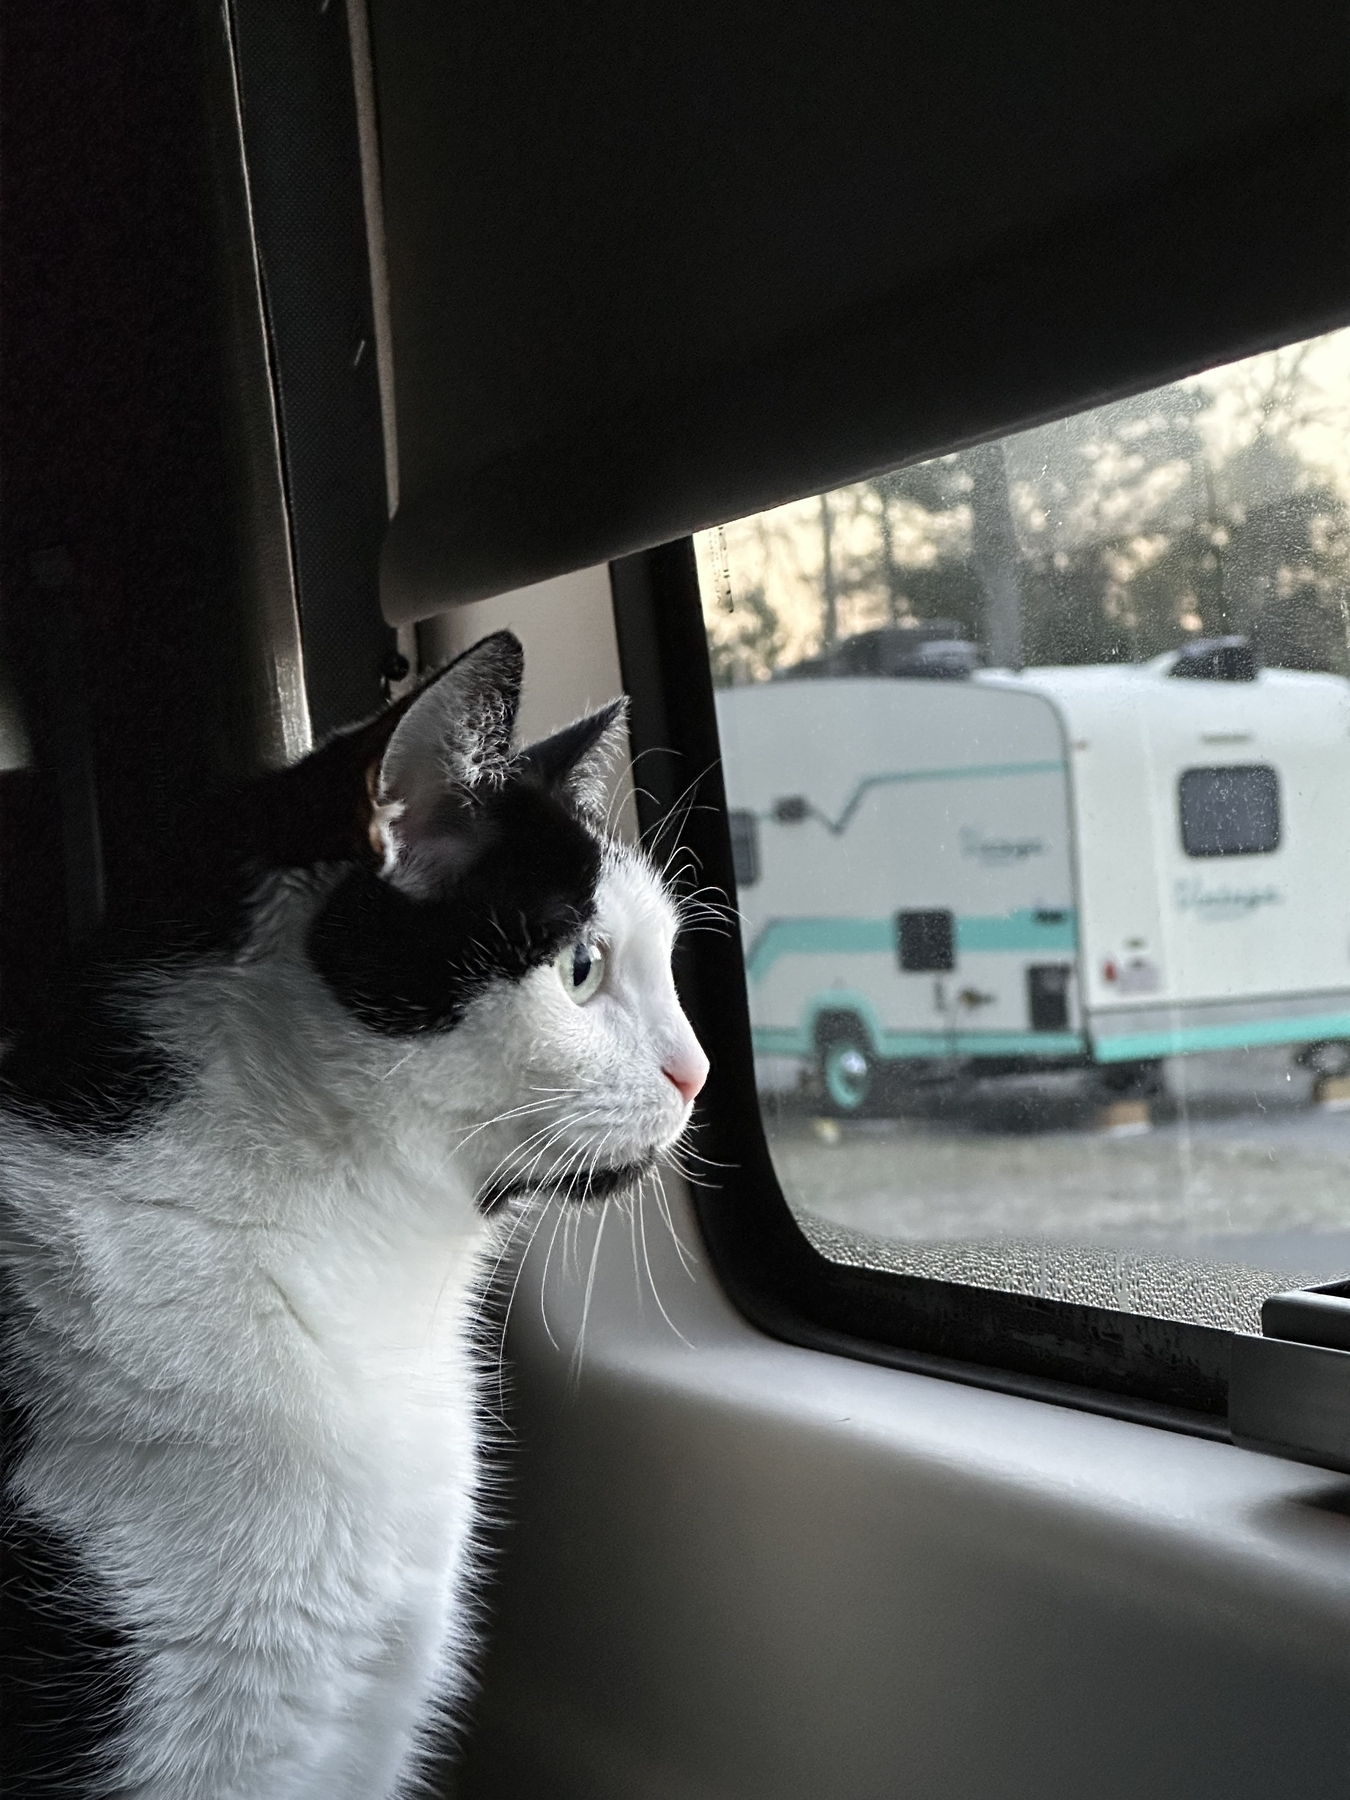 Cat looking out a van window with an RV in the background.